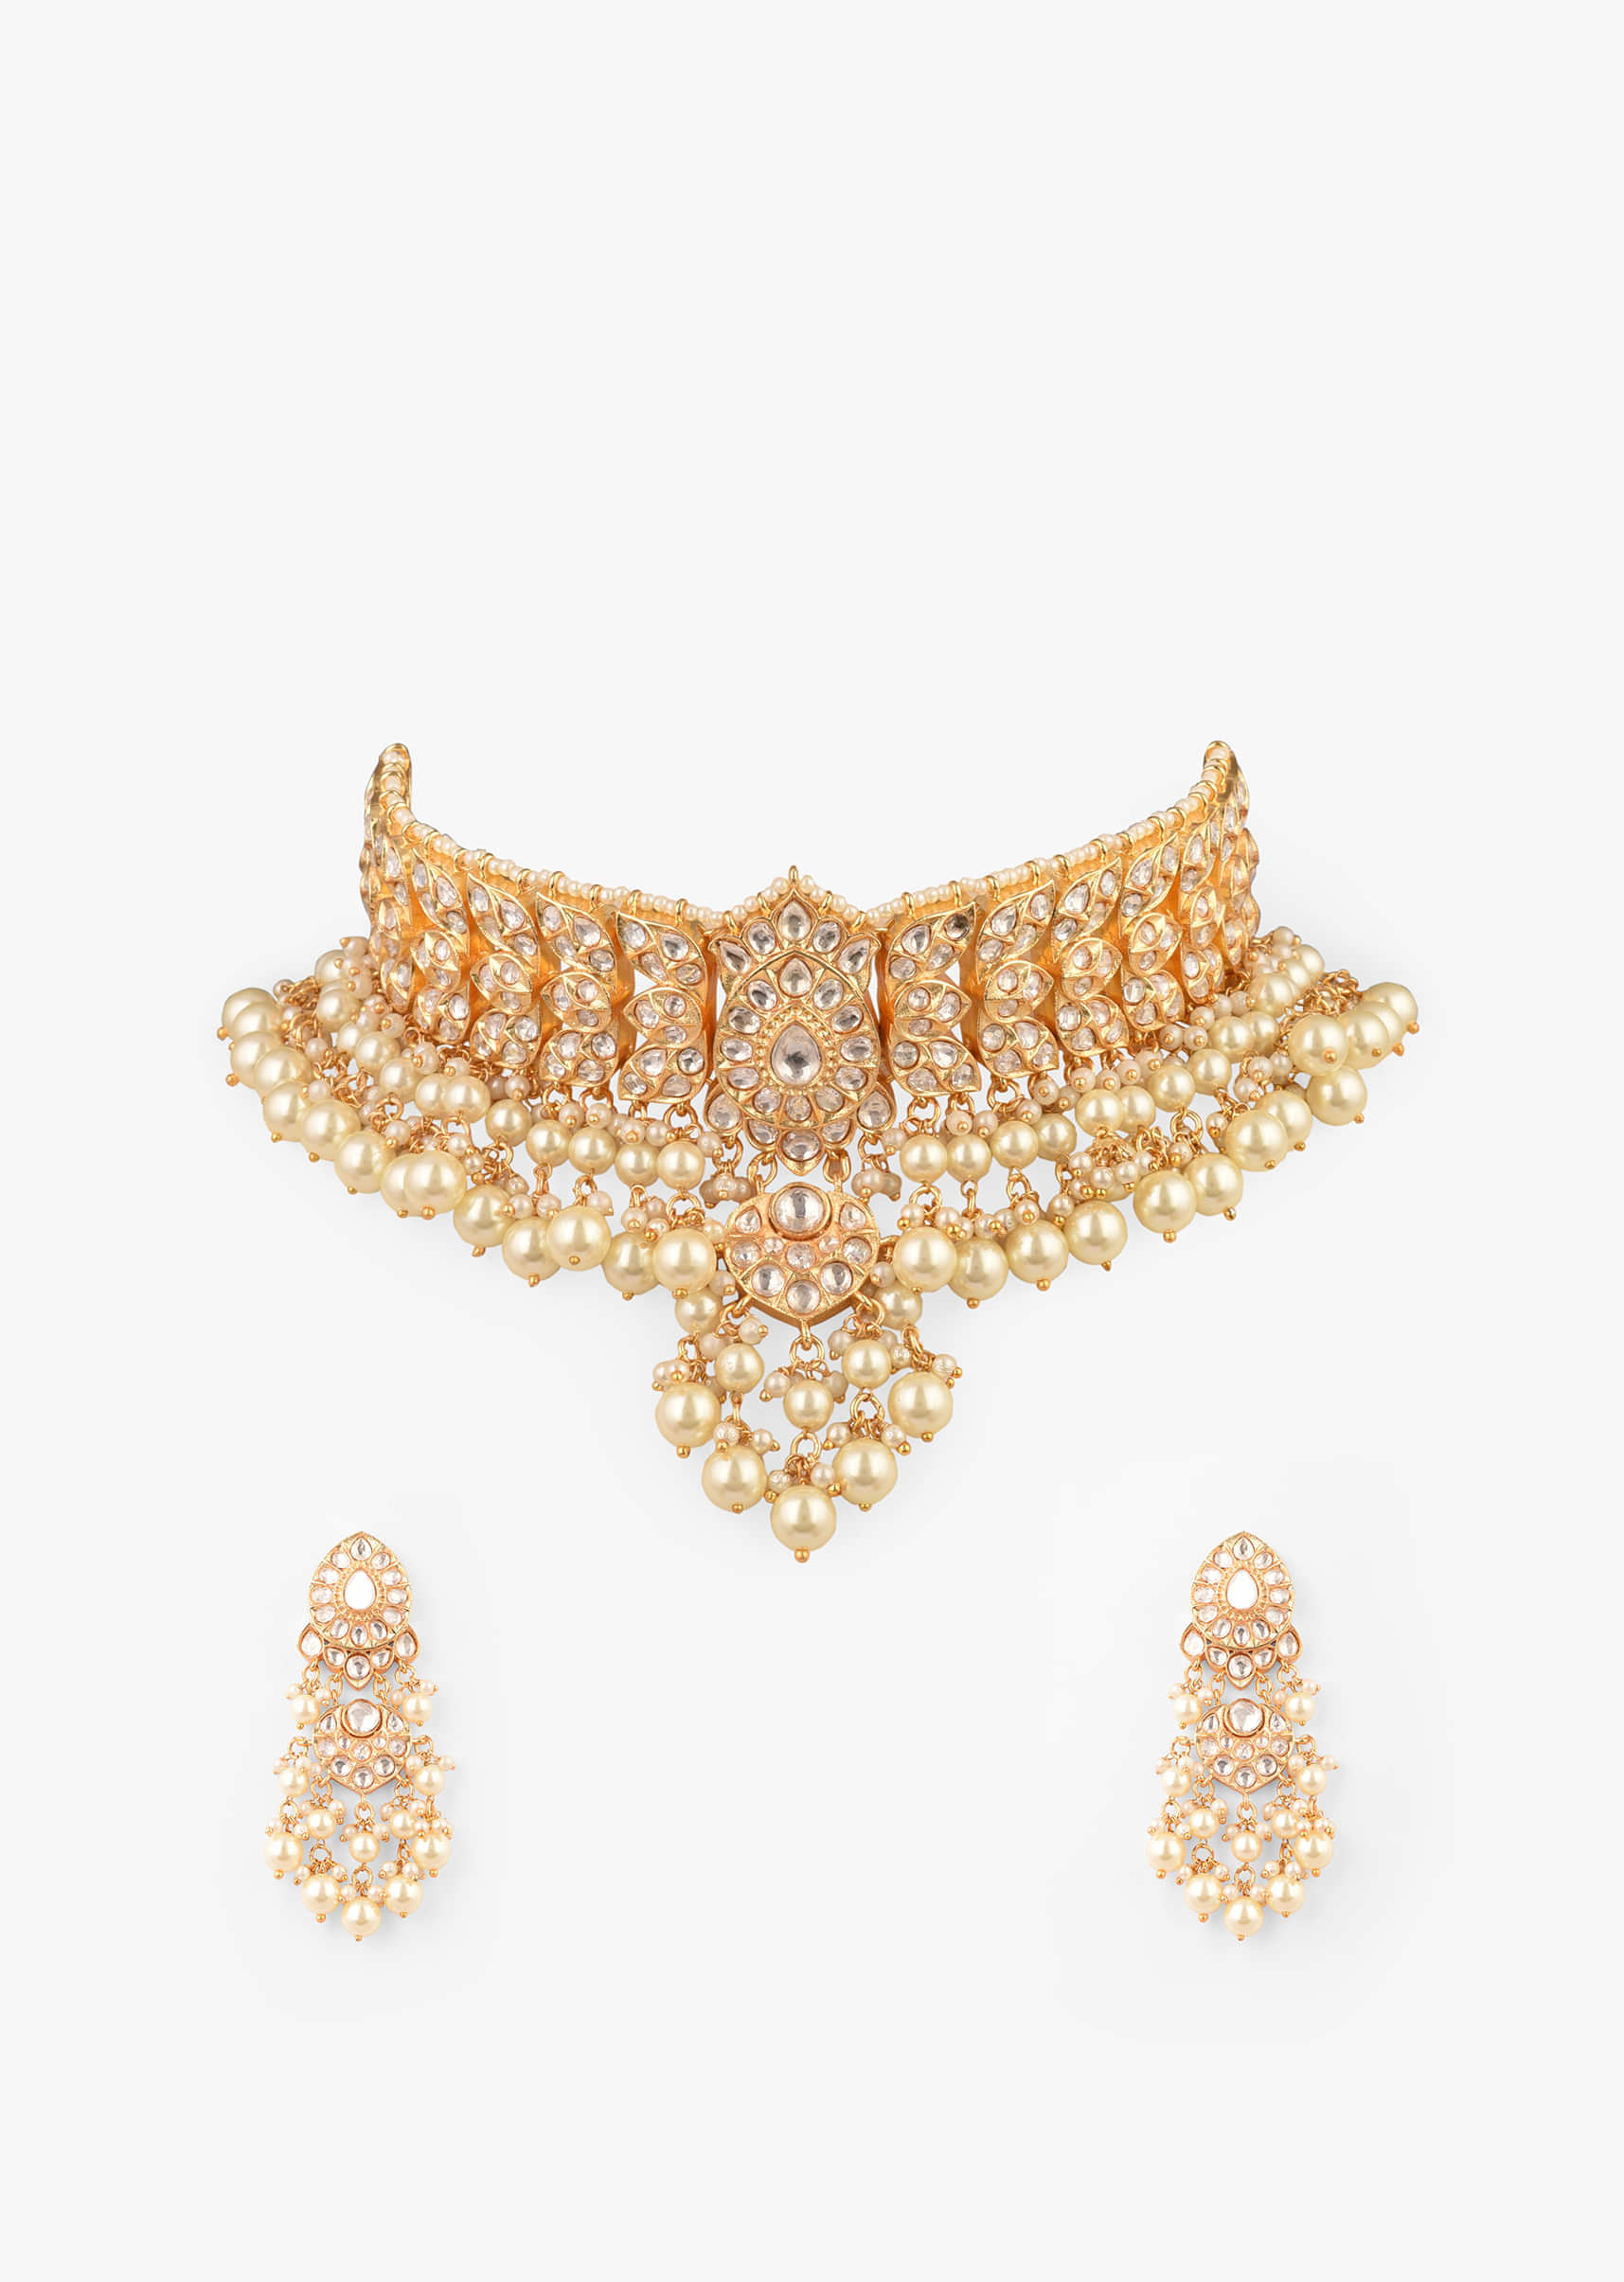 Gold Plated Choker Set With Kundan Work In Ethnic Design With Dangling Pearl Fringes